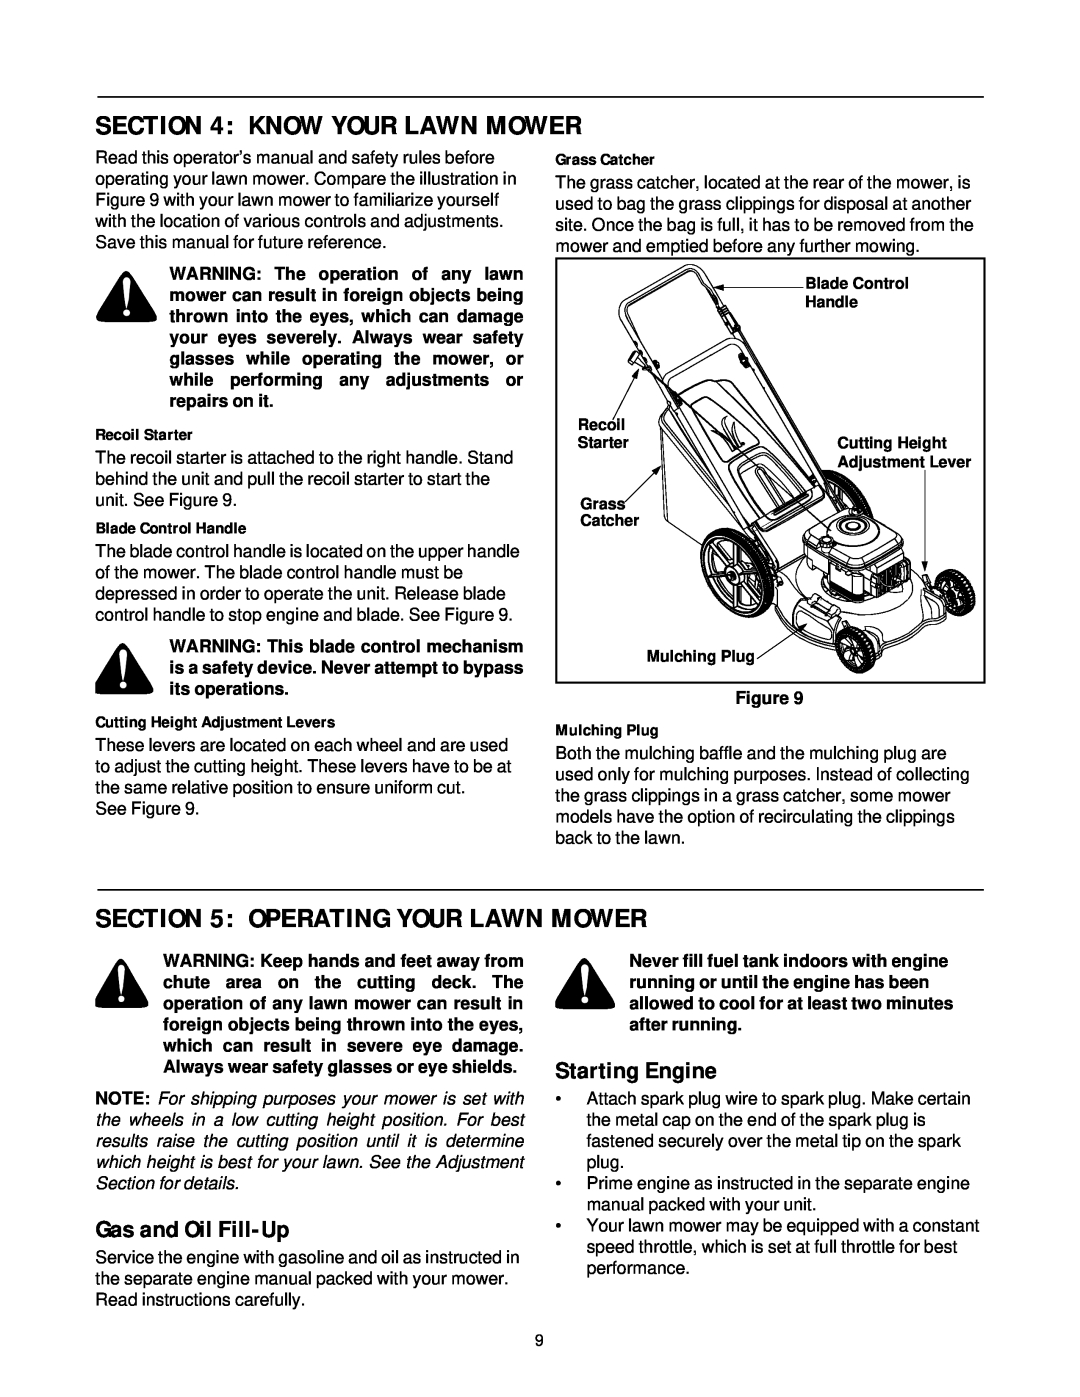 Bolens Series 540 Know Your Lawn Mower, Operating Your Lawn Mower, Gas and Oil Fill-Up, Starting Engine, Recoil Starter 